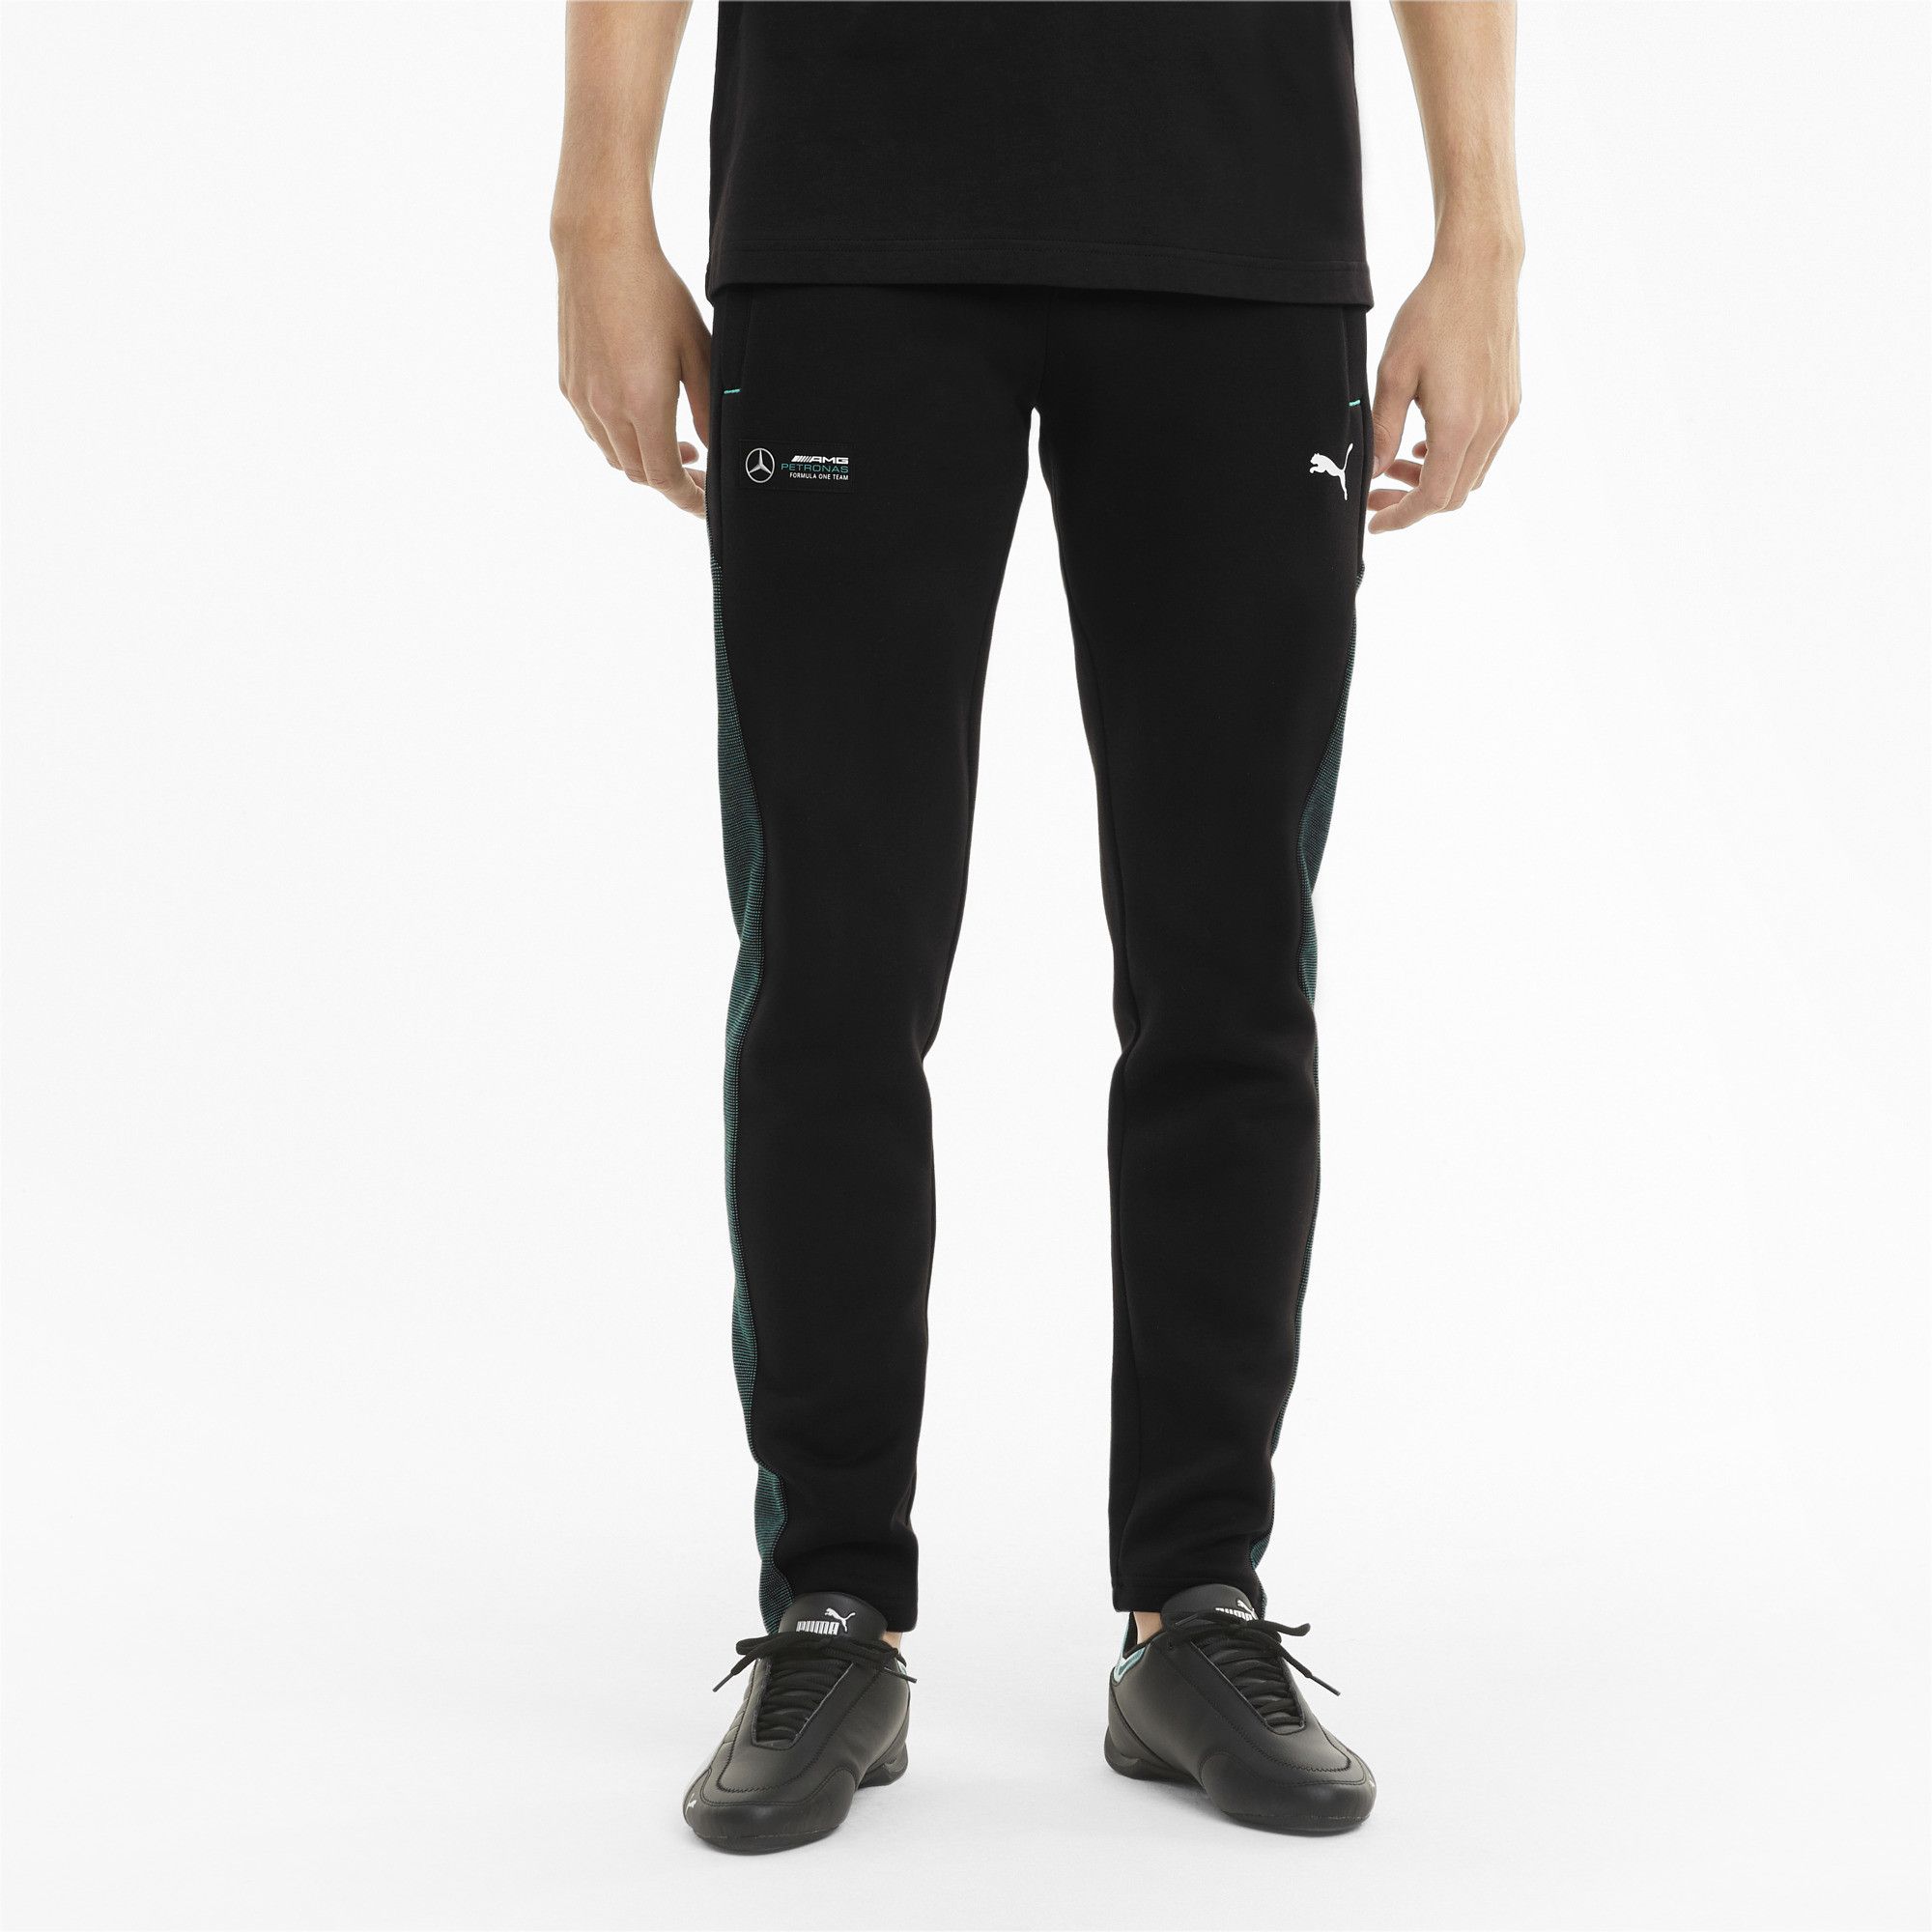 PRODUCT STORY

For high-octane fan style, these two-tone, double-sided sweatpants have a slim fit and showcase the Mercedes-AMG Petronas Motorsport badge and PUMA Cat Logo at the legs. The internal drawcord waistband and welt zip pockets are slick details that enhance the feeling of quality.

FEATURES & BENEFITS

By buying cotton products from PUMA, you’re supporting more sustainable cotton farming. 
DETAILS

Our model is 183 cm tall and is wearing size M
Slim fit
Open cuffs
Mercedes-AMG Petronas F1 badge at leg
PUMA Cat Logo at leg
Cotton and polyester